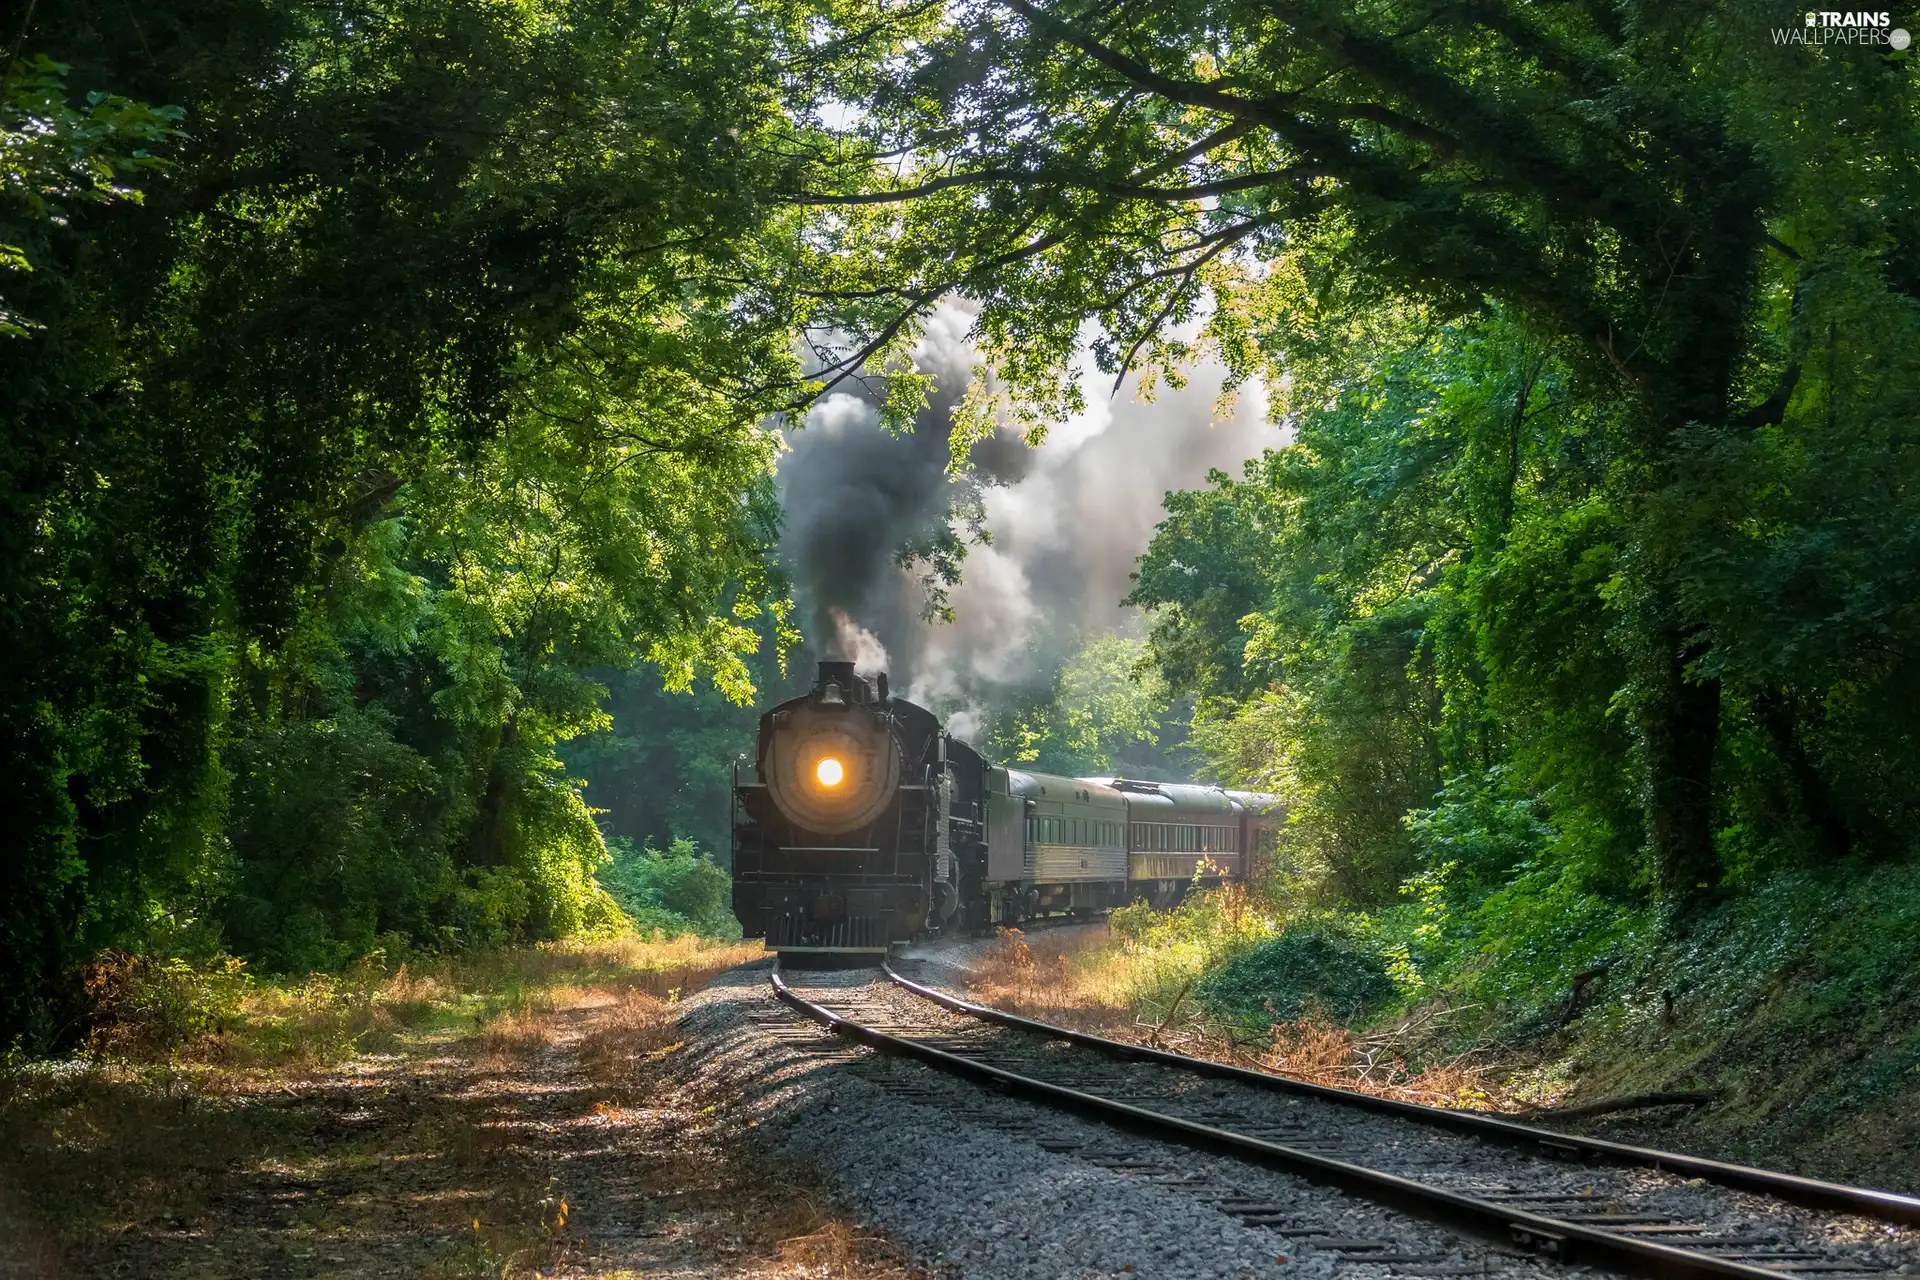 viewes, forest, steam train, smoke, ##, trees